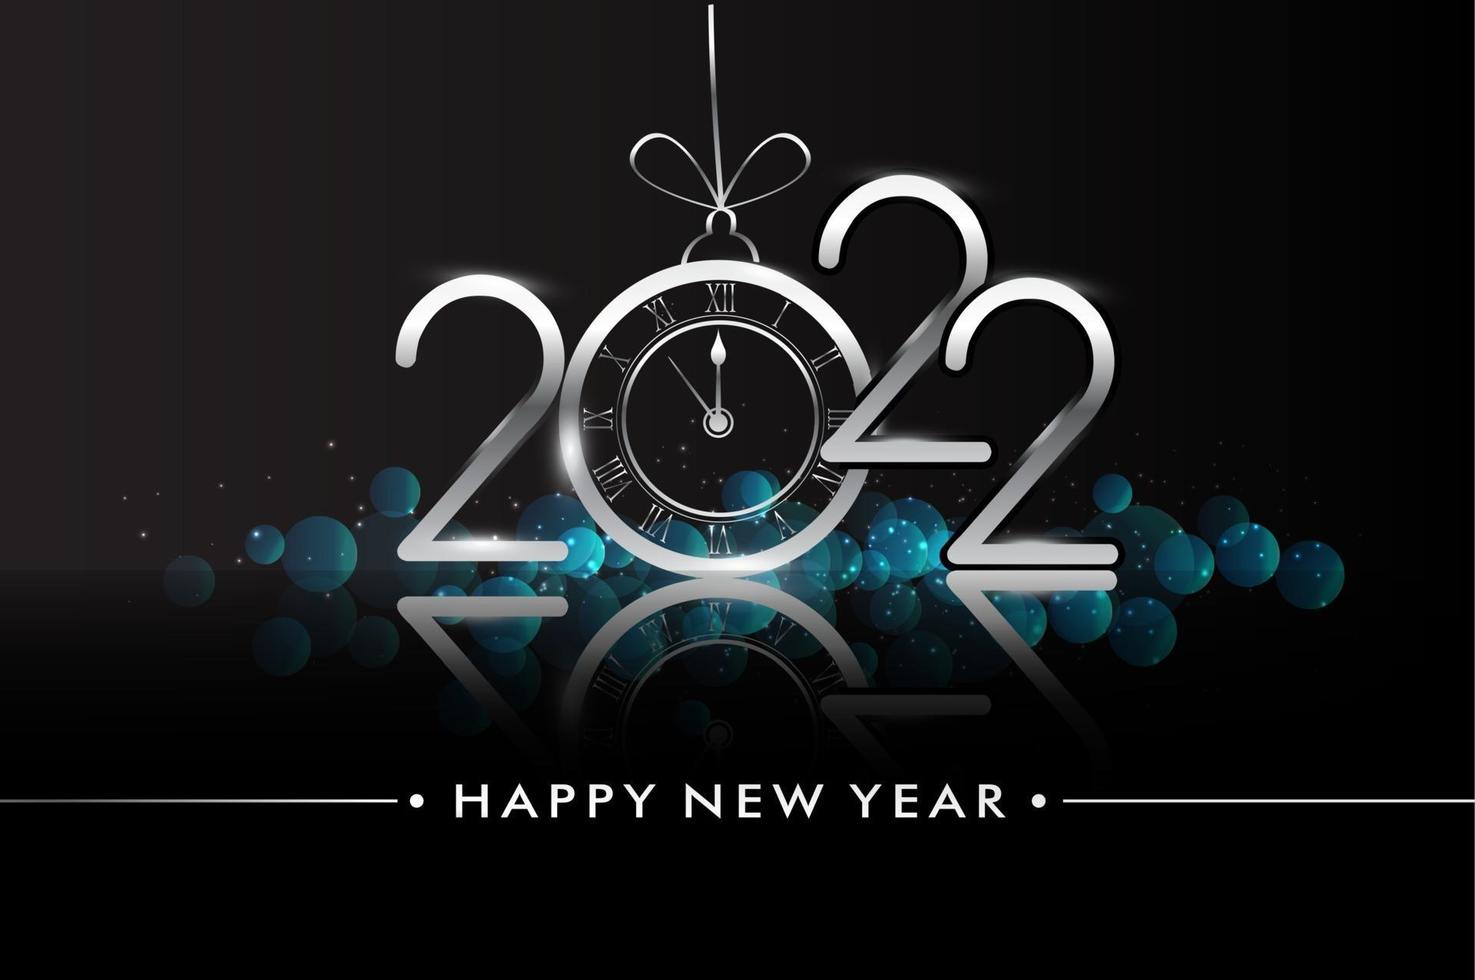 Happy New Year 2022 - New Year Shining background with clock vector